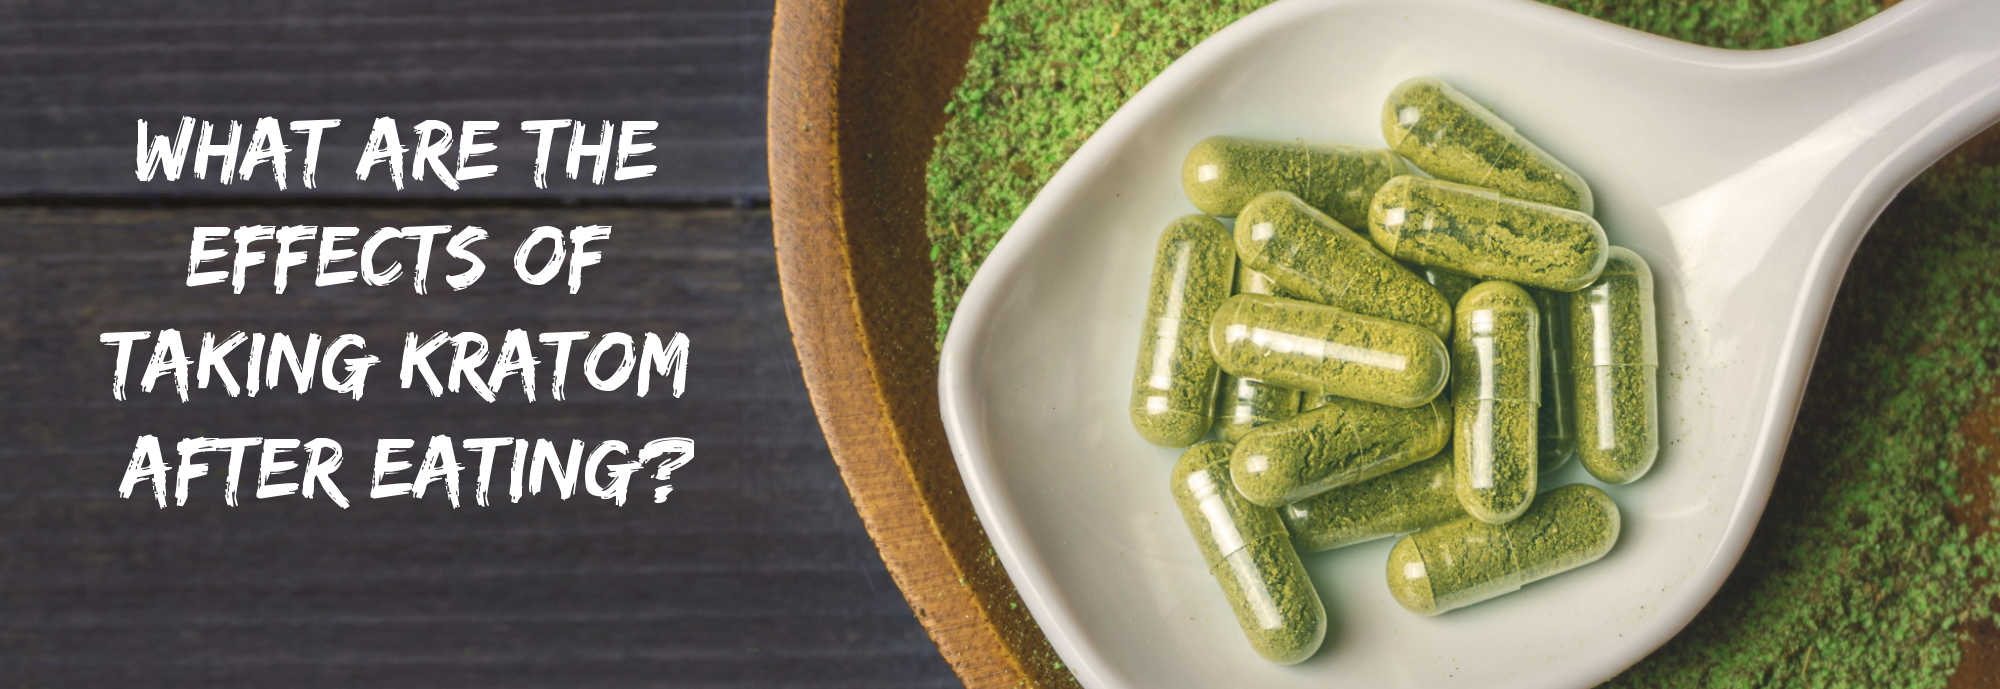 Can You Eat After Taking Kratom?